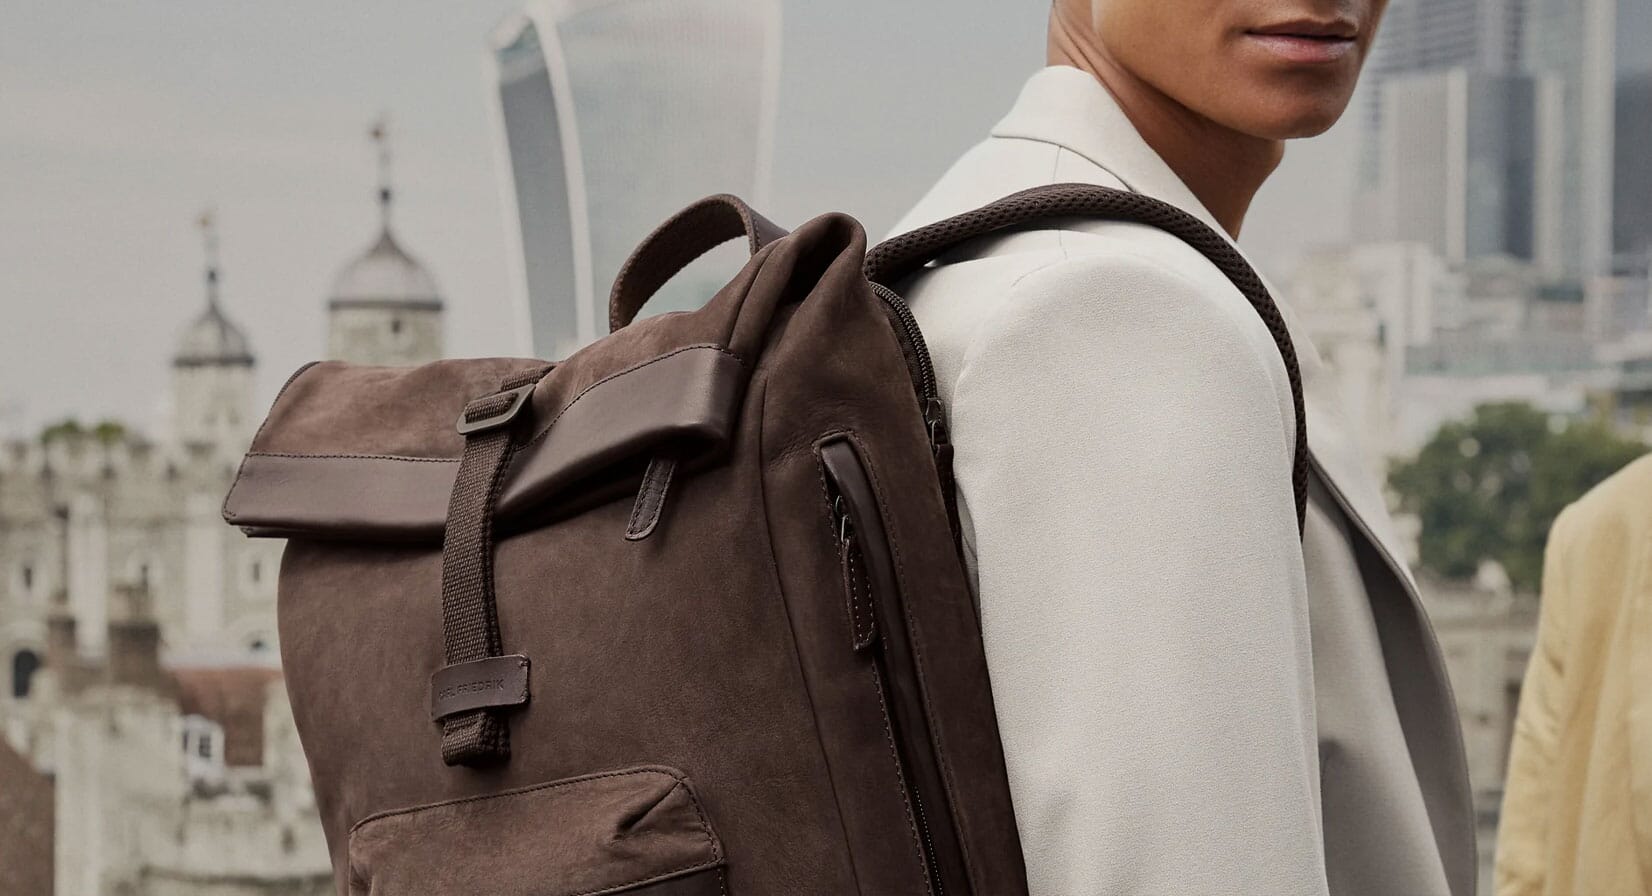 The 9 Best Leather Backpacks for Men